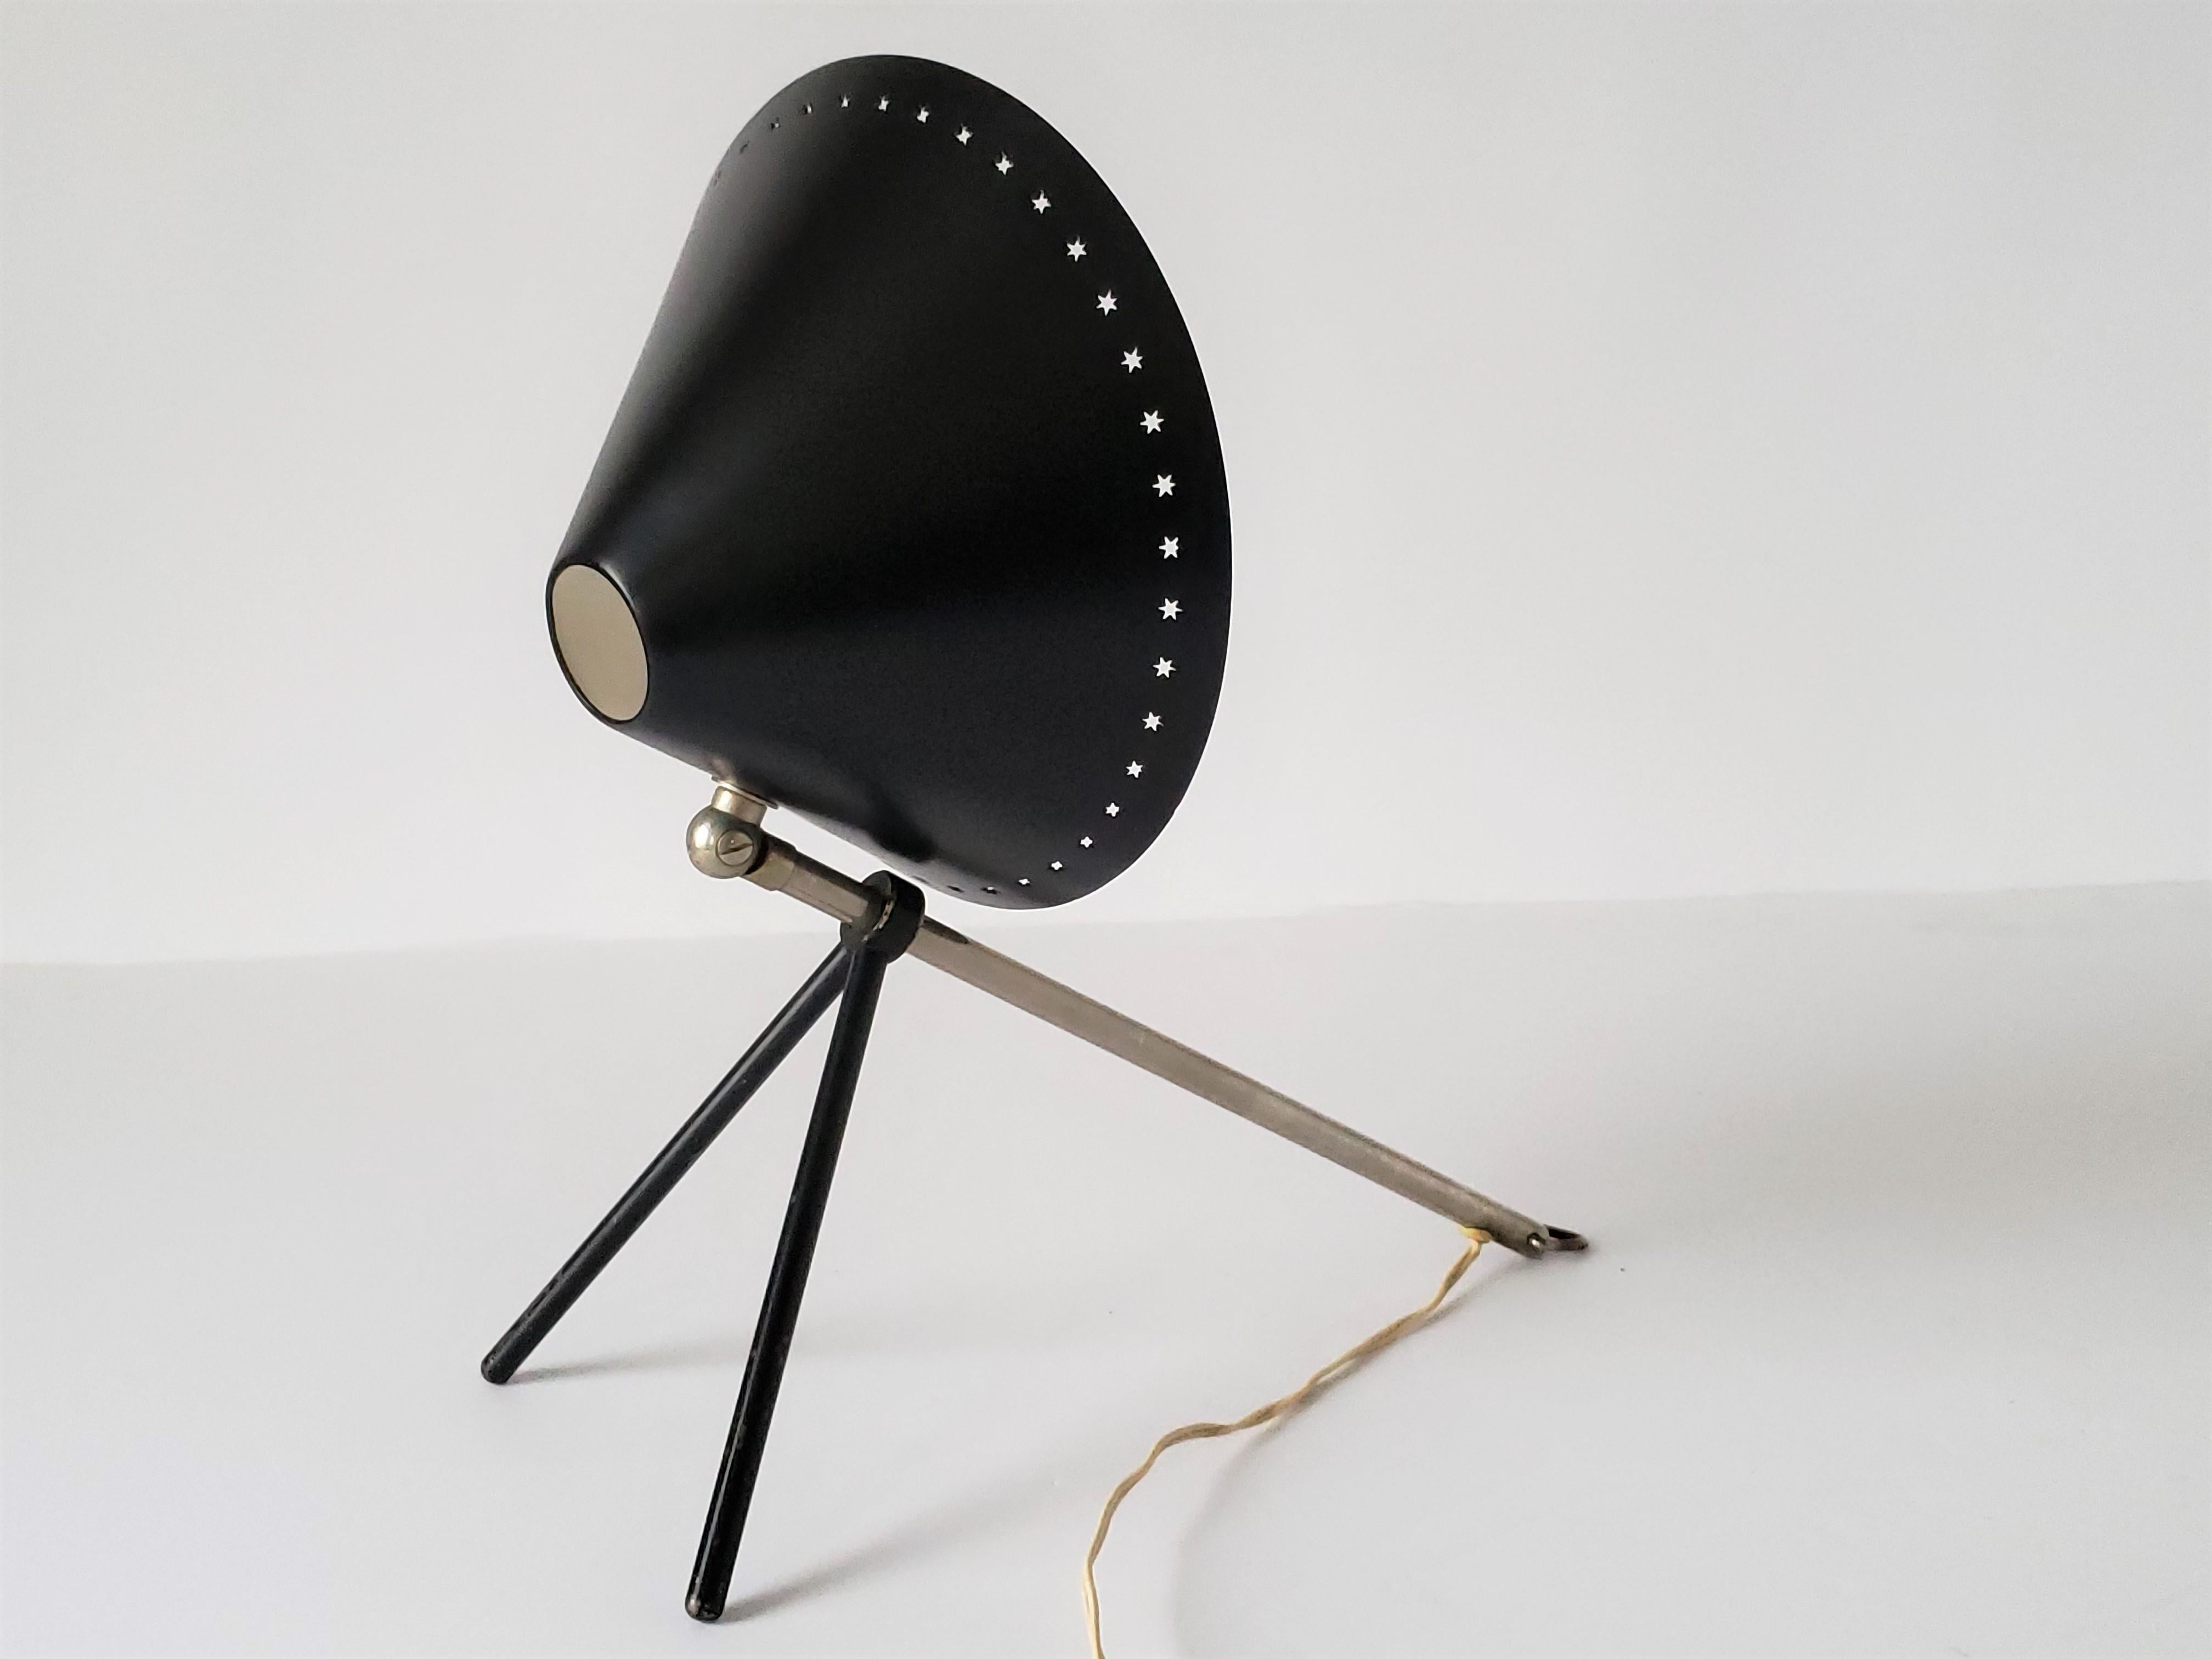 Mid-Century Modern 1950s  'Pinocchio' Table or Wall Lamp by H. Busquet for Hala Zeist, Netherlands